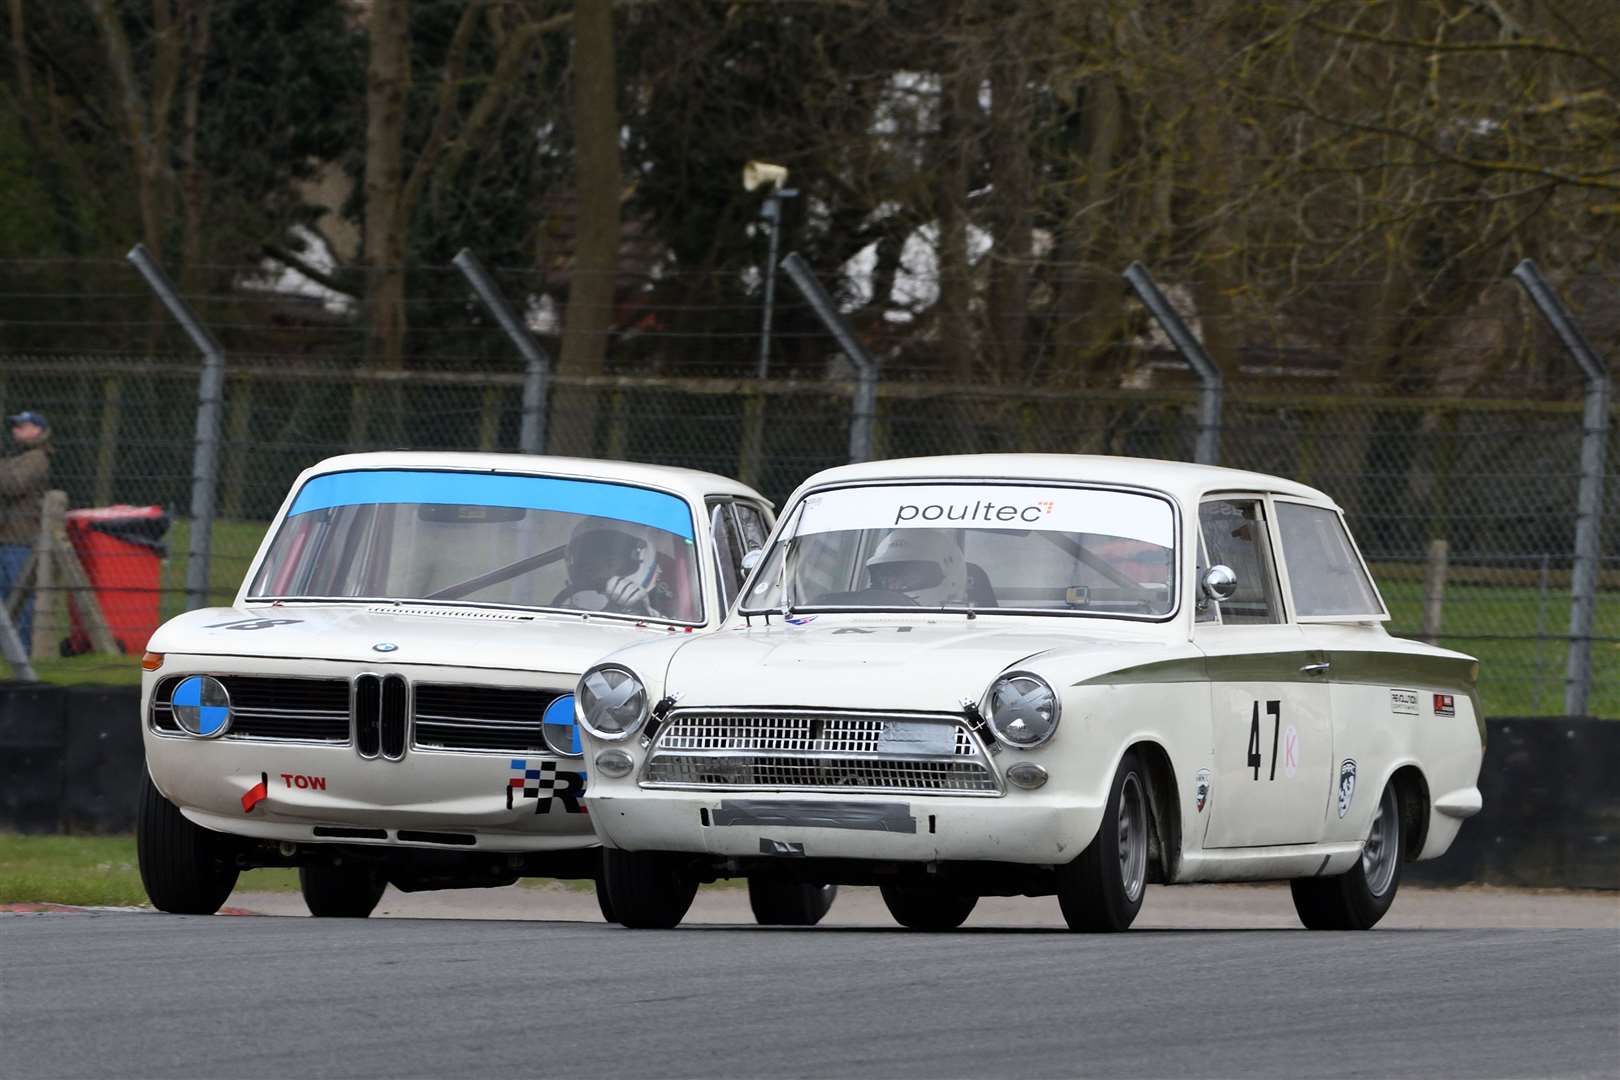 Harry Barton in his BMW 1800Ti and Ford Lotus Cortina pilot Nigel Cox had a race-long battle during the second Historic Touring Car event. They eventually clashed at Paddock Hill Bend with the Cortina being tipped on its side and ending the race two laps early